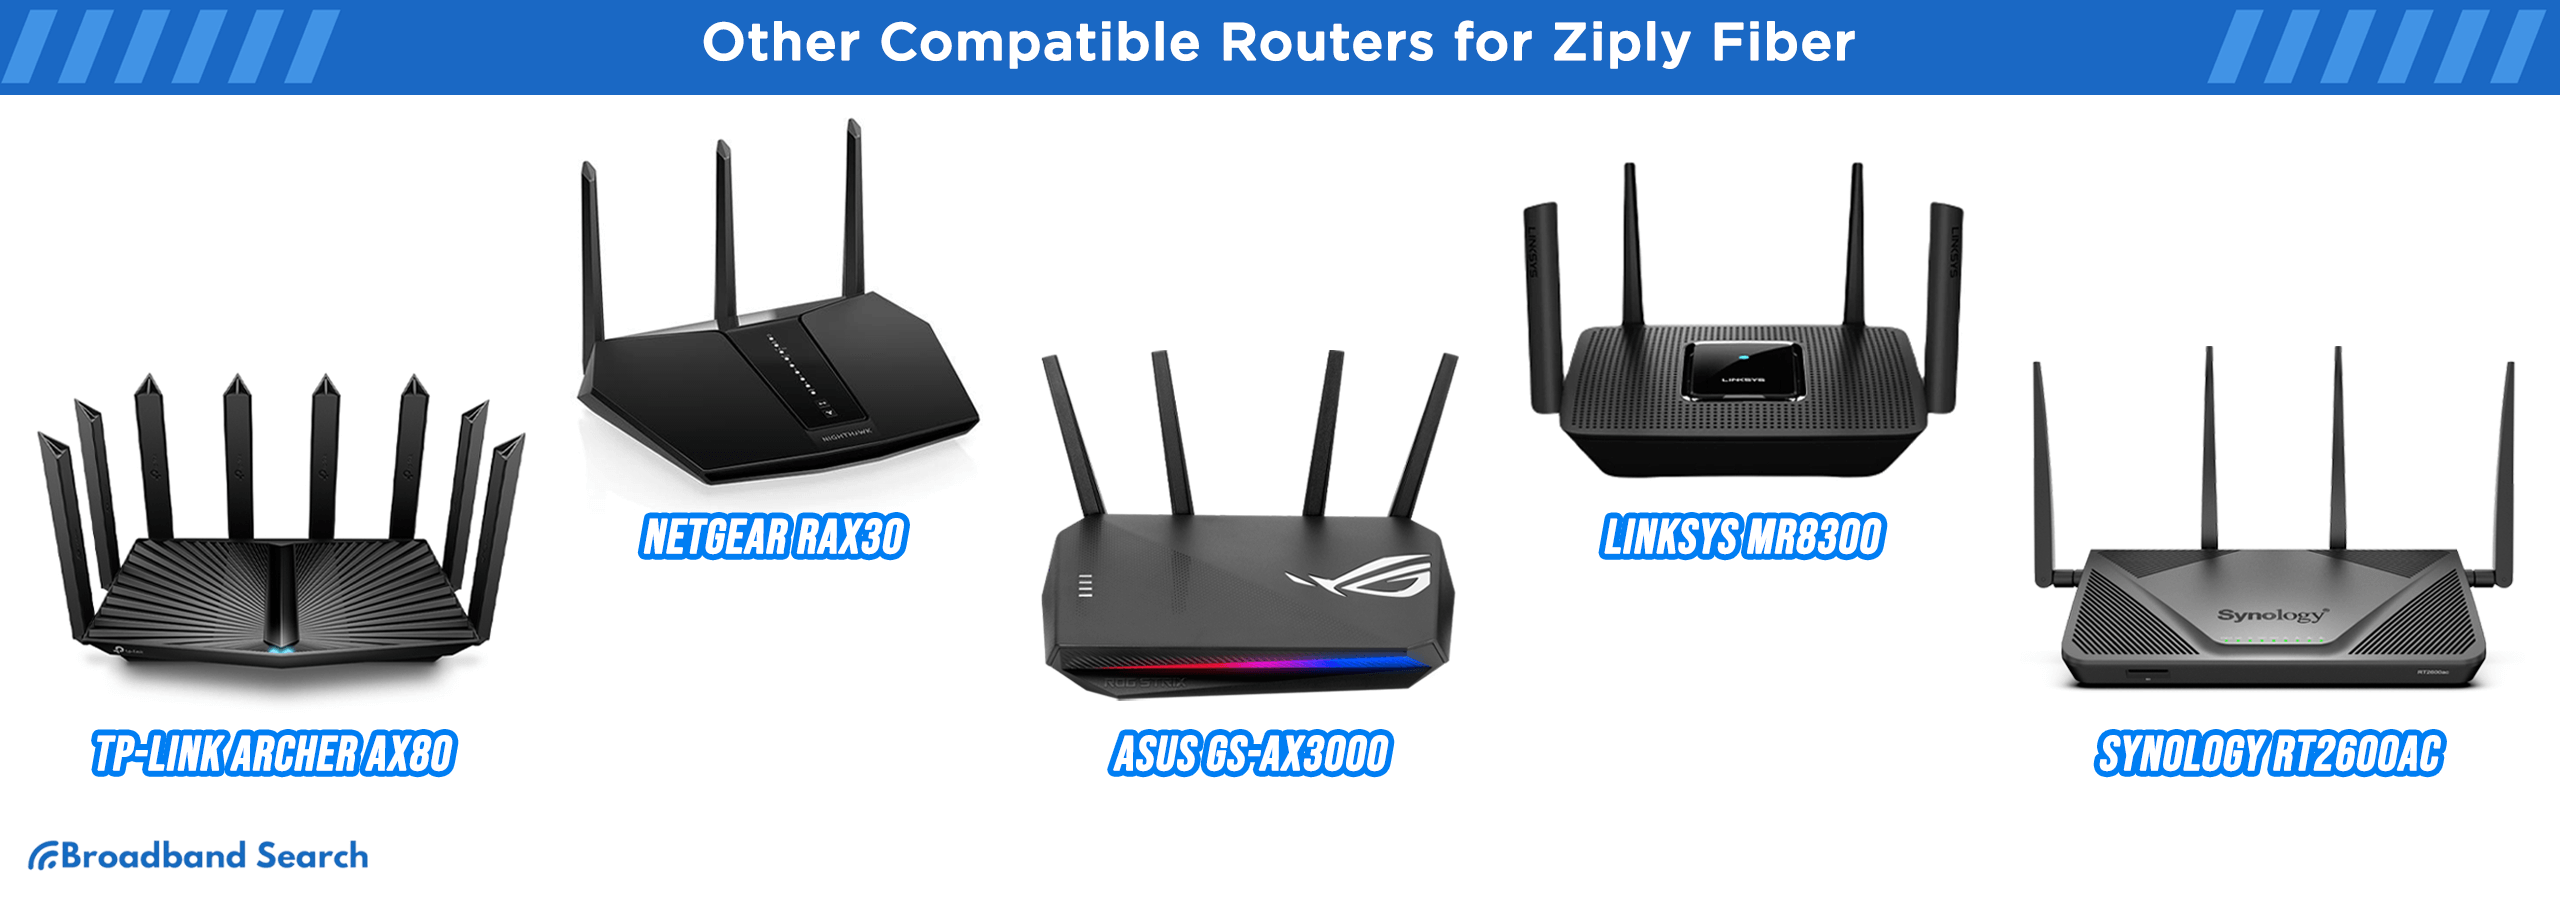 Other Compatible routers for ziply fiber